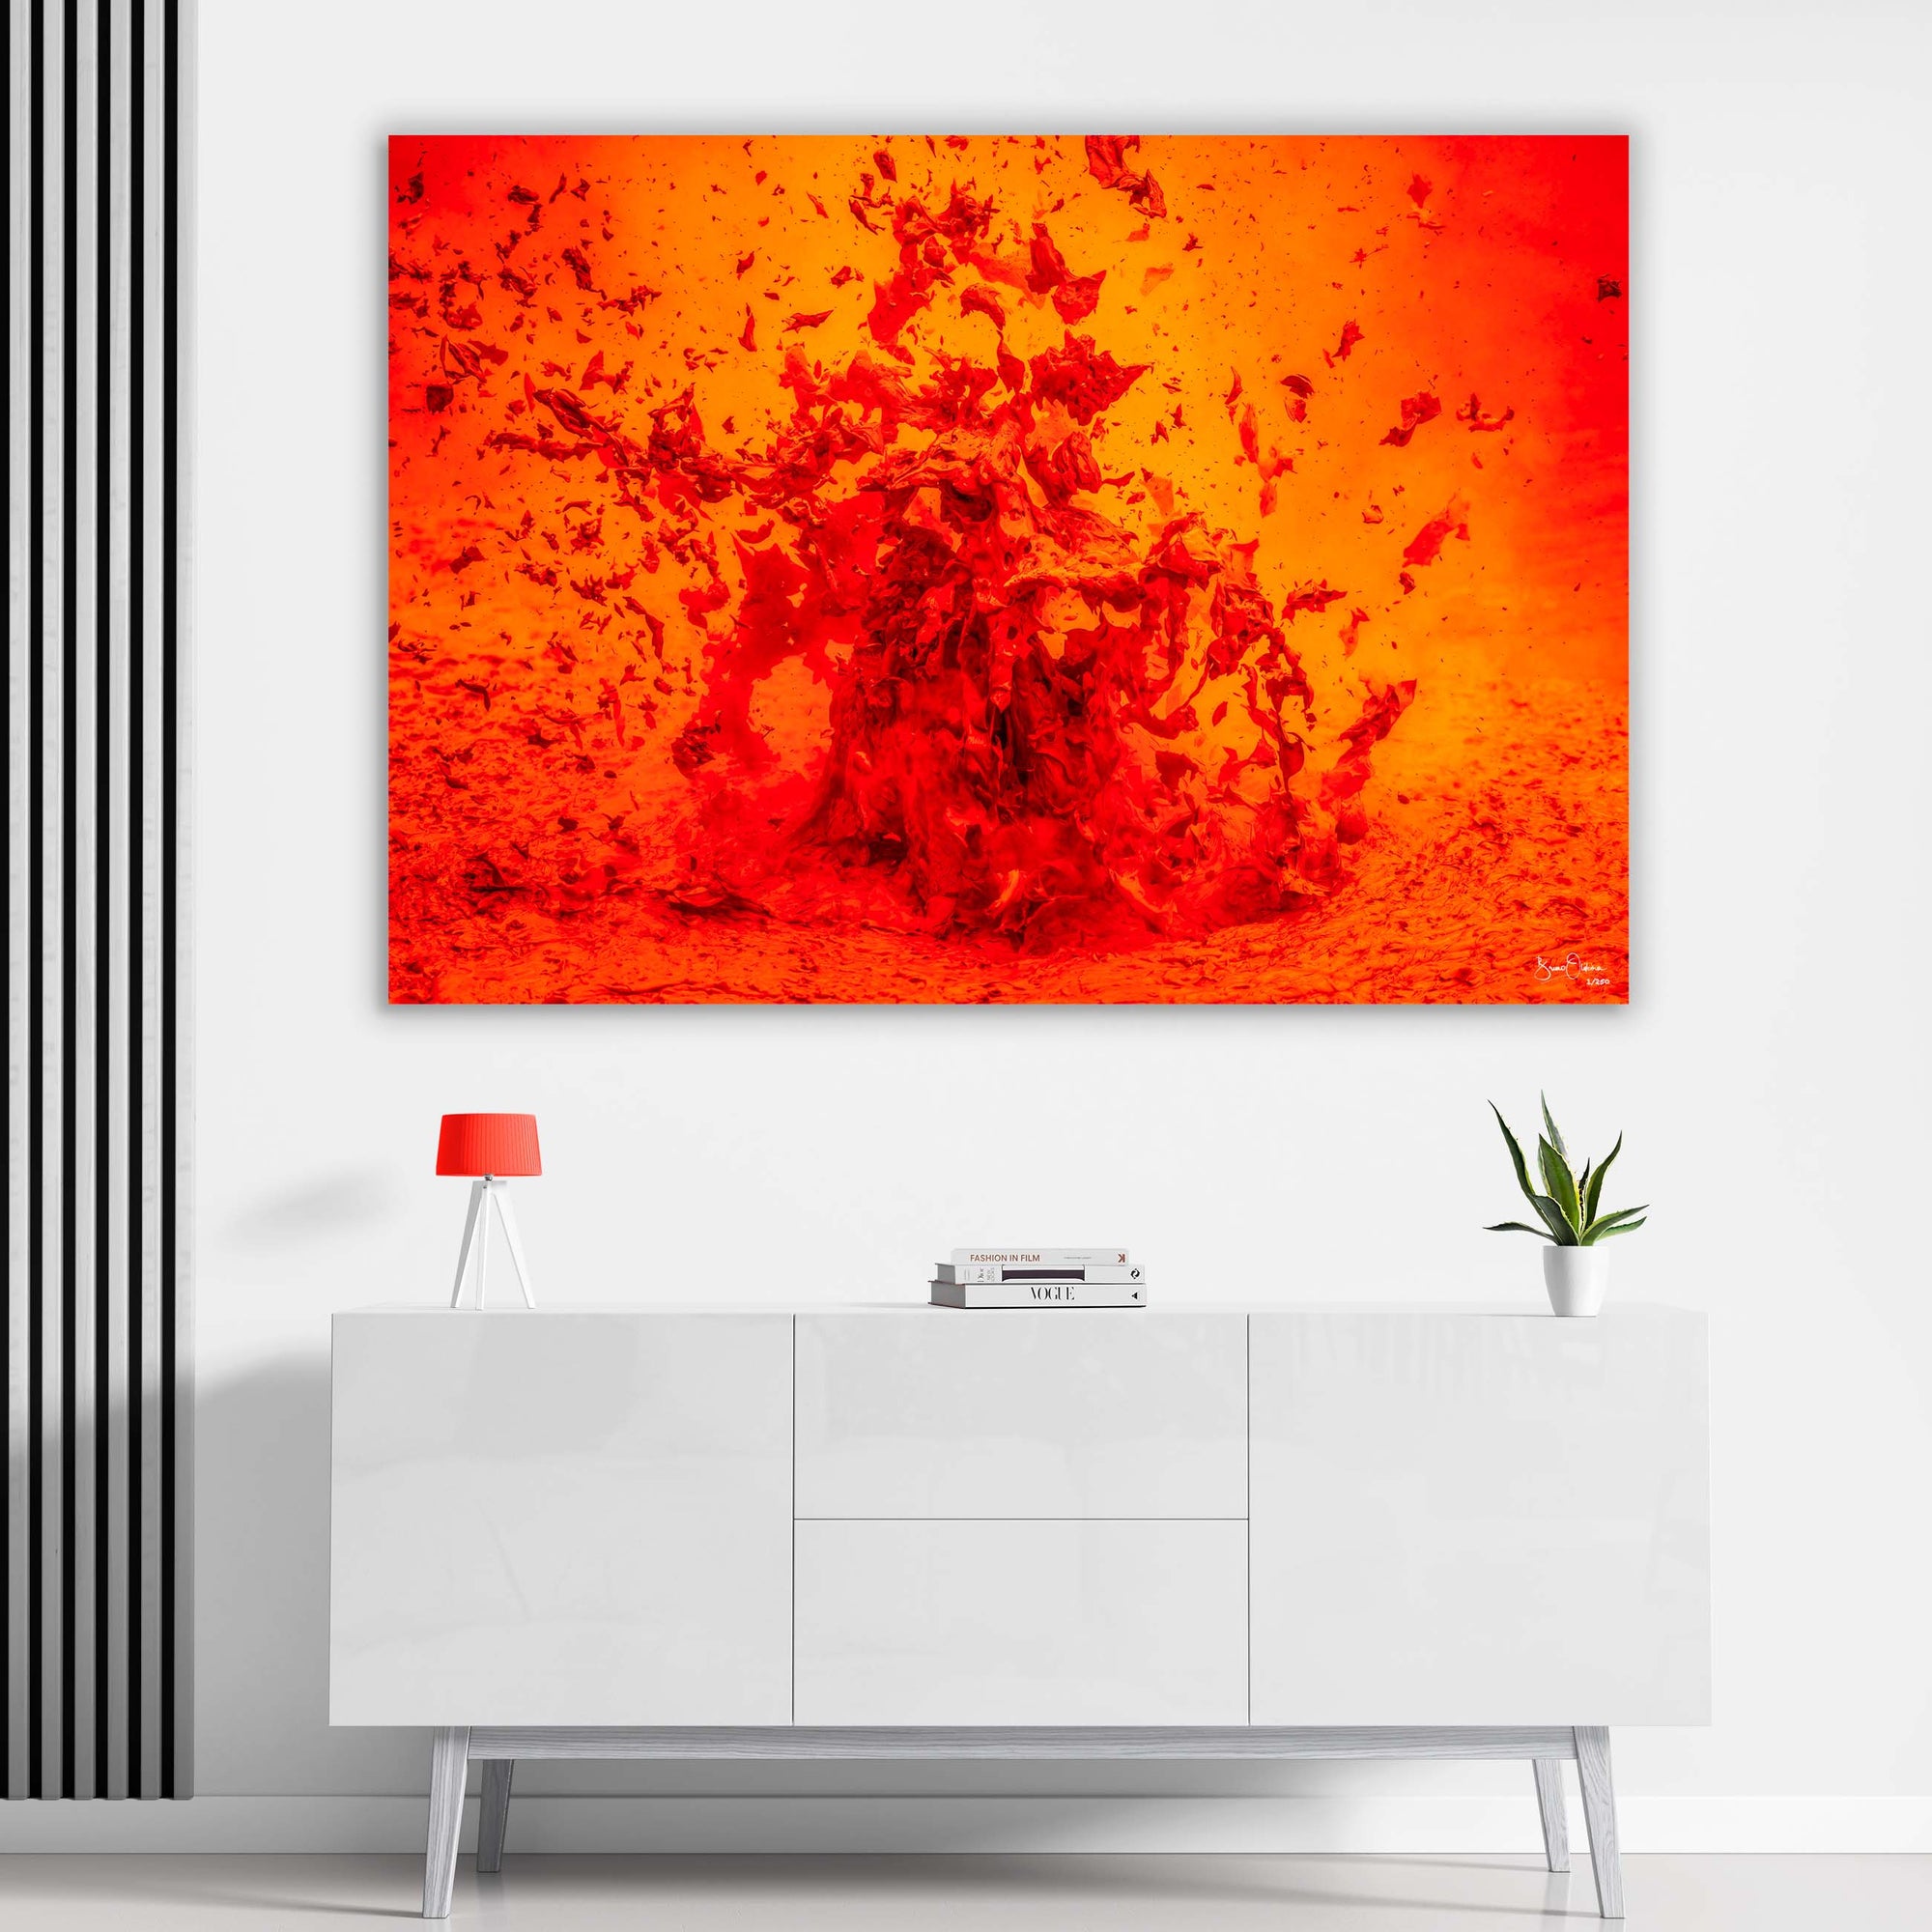 Orange Large Abstract Luxury Wall Art Print Artistic Explosion Colorful